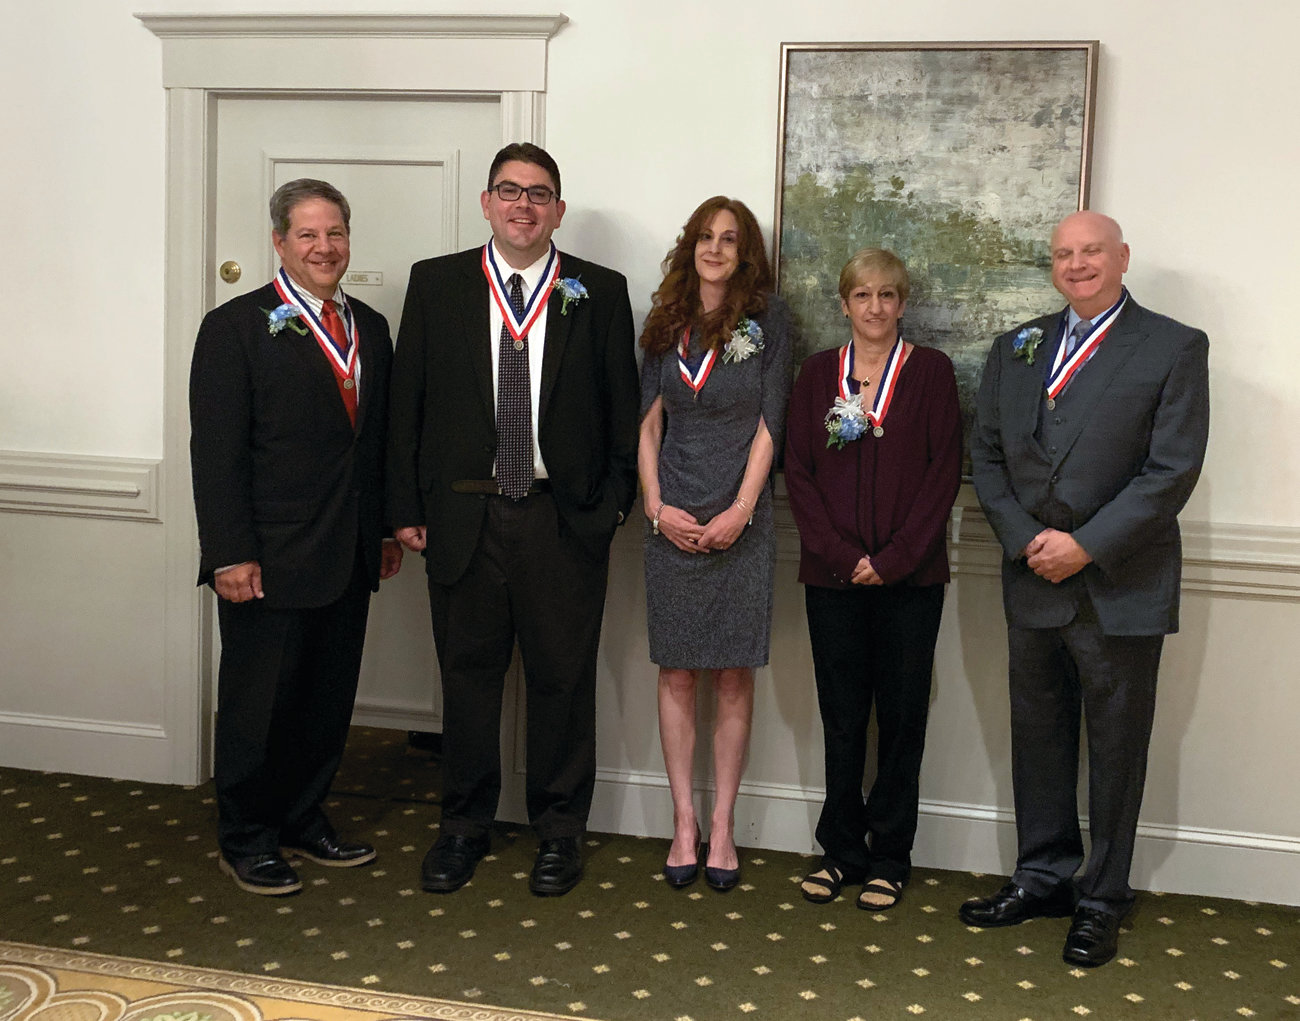 HALL OF FAMERS: The members of the Cranston Hall of Fame’s class of 2019 gather together following Friday’s dinner. Pictured, from left, are Steven Maurano, David Schiappa, Dawn Piechocki – who represented her late father, Leonard D’Errico – Meri Kennedy and Michael Chalek.